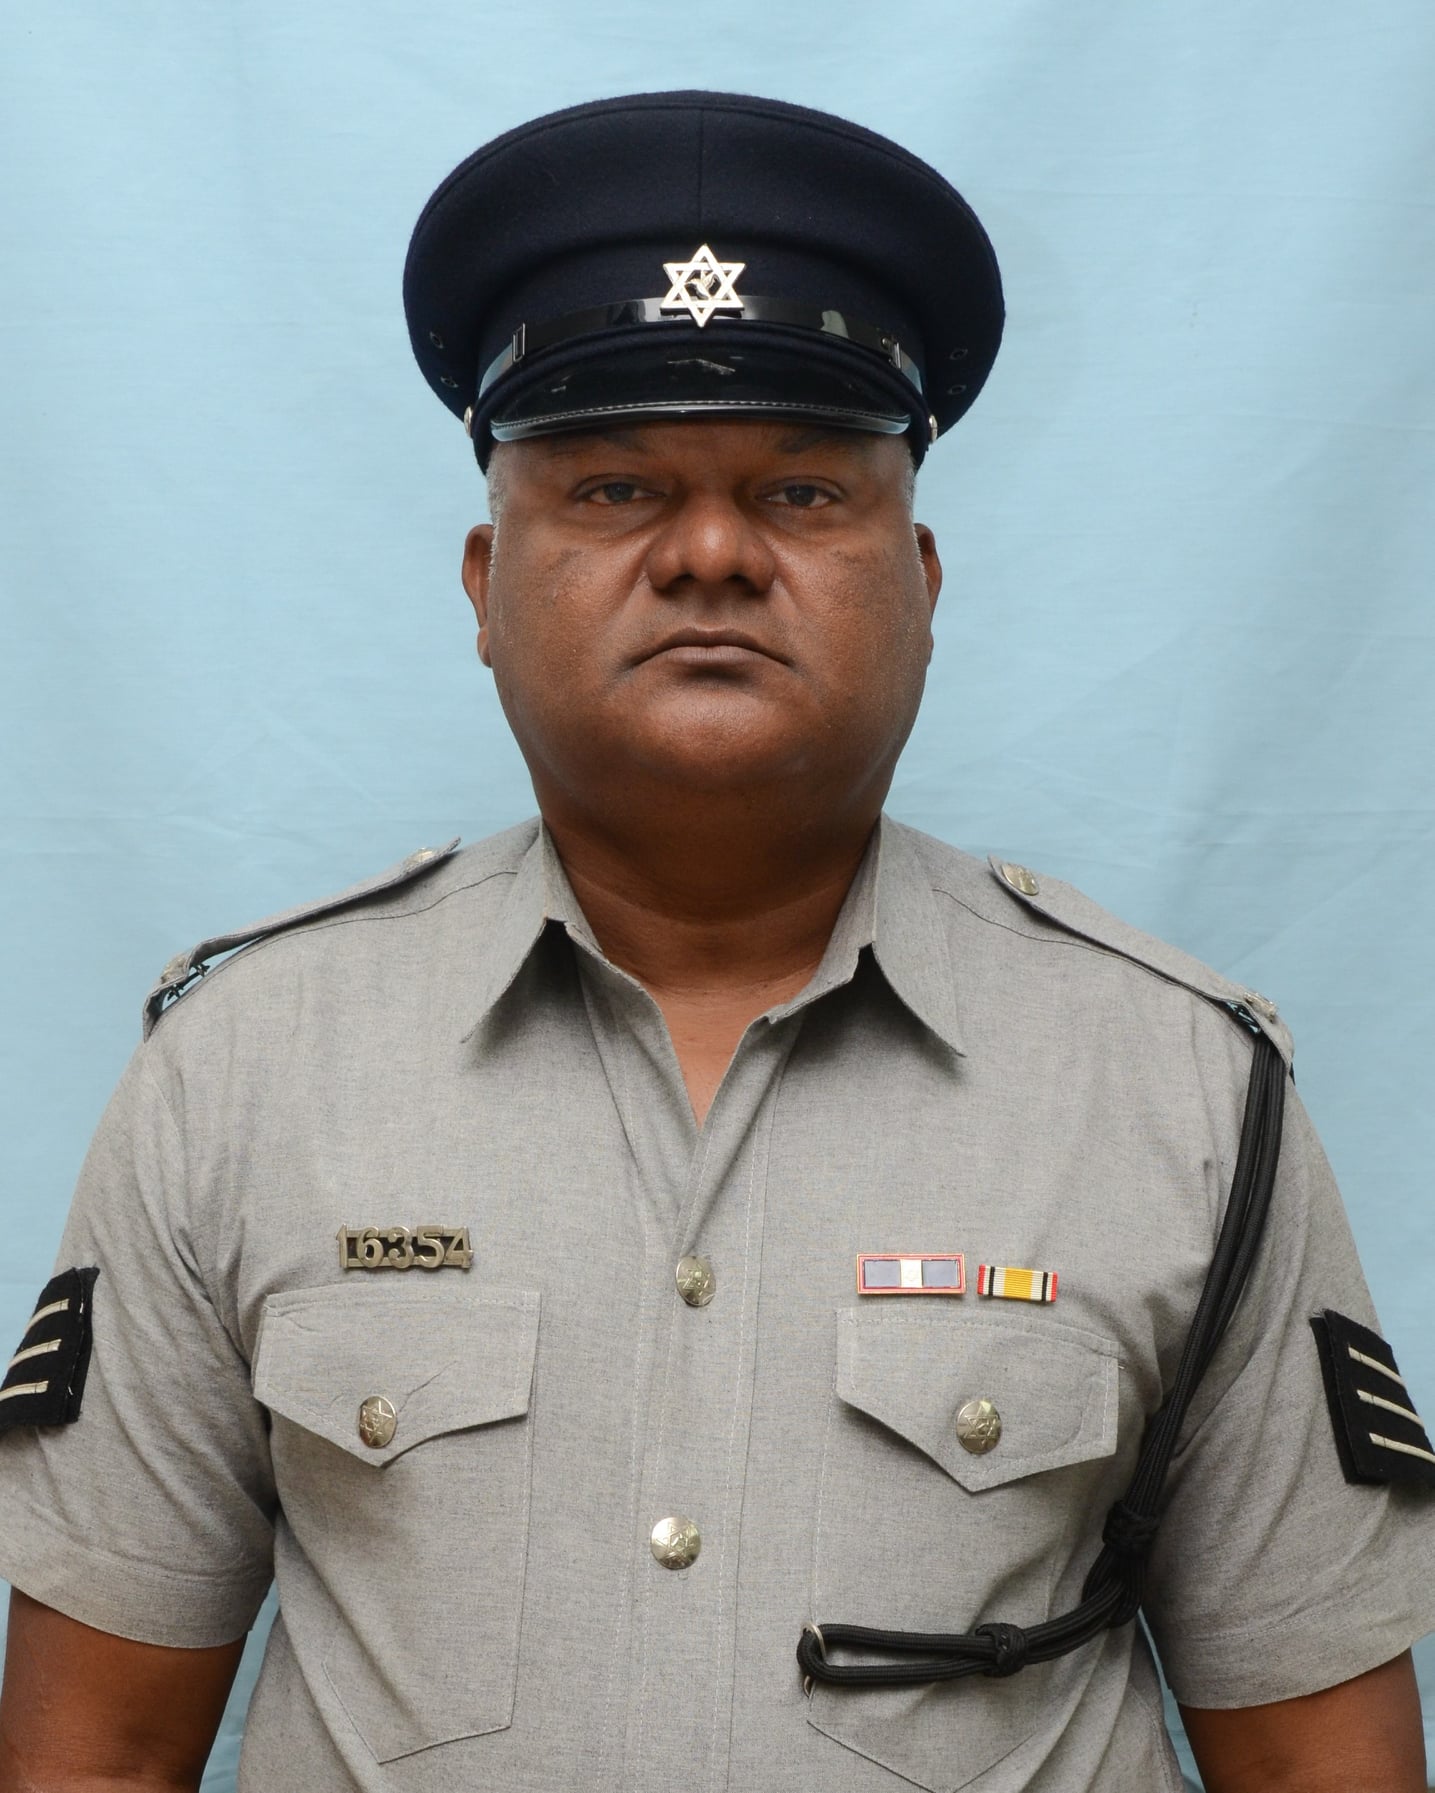 CoP sends condolences to Acting Insp. Sookram who passed away while undergoing medical treatment